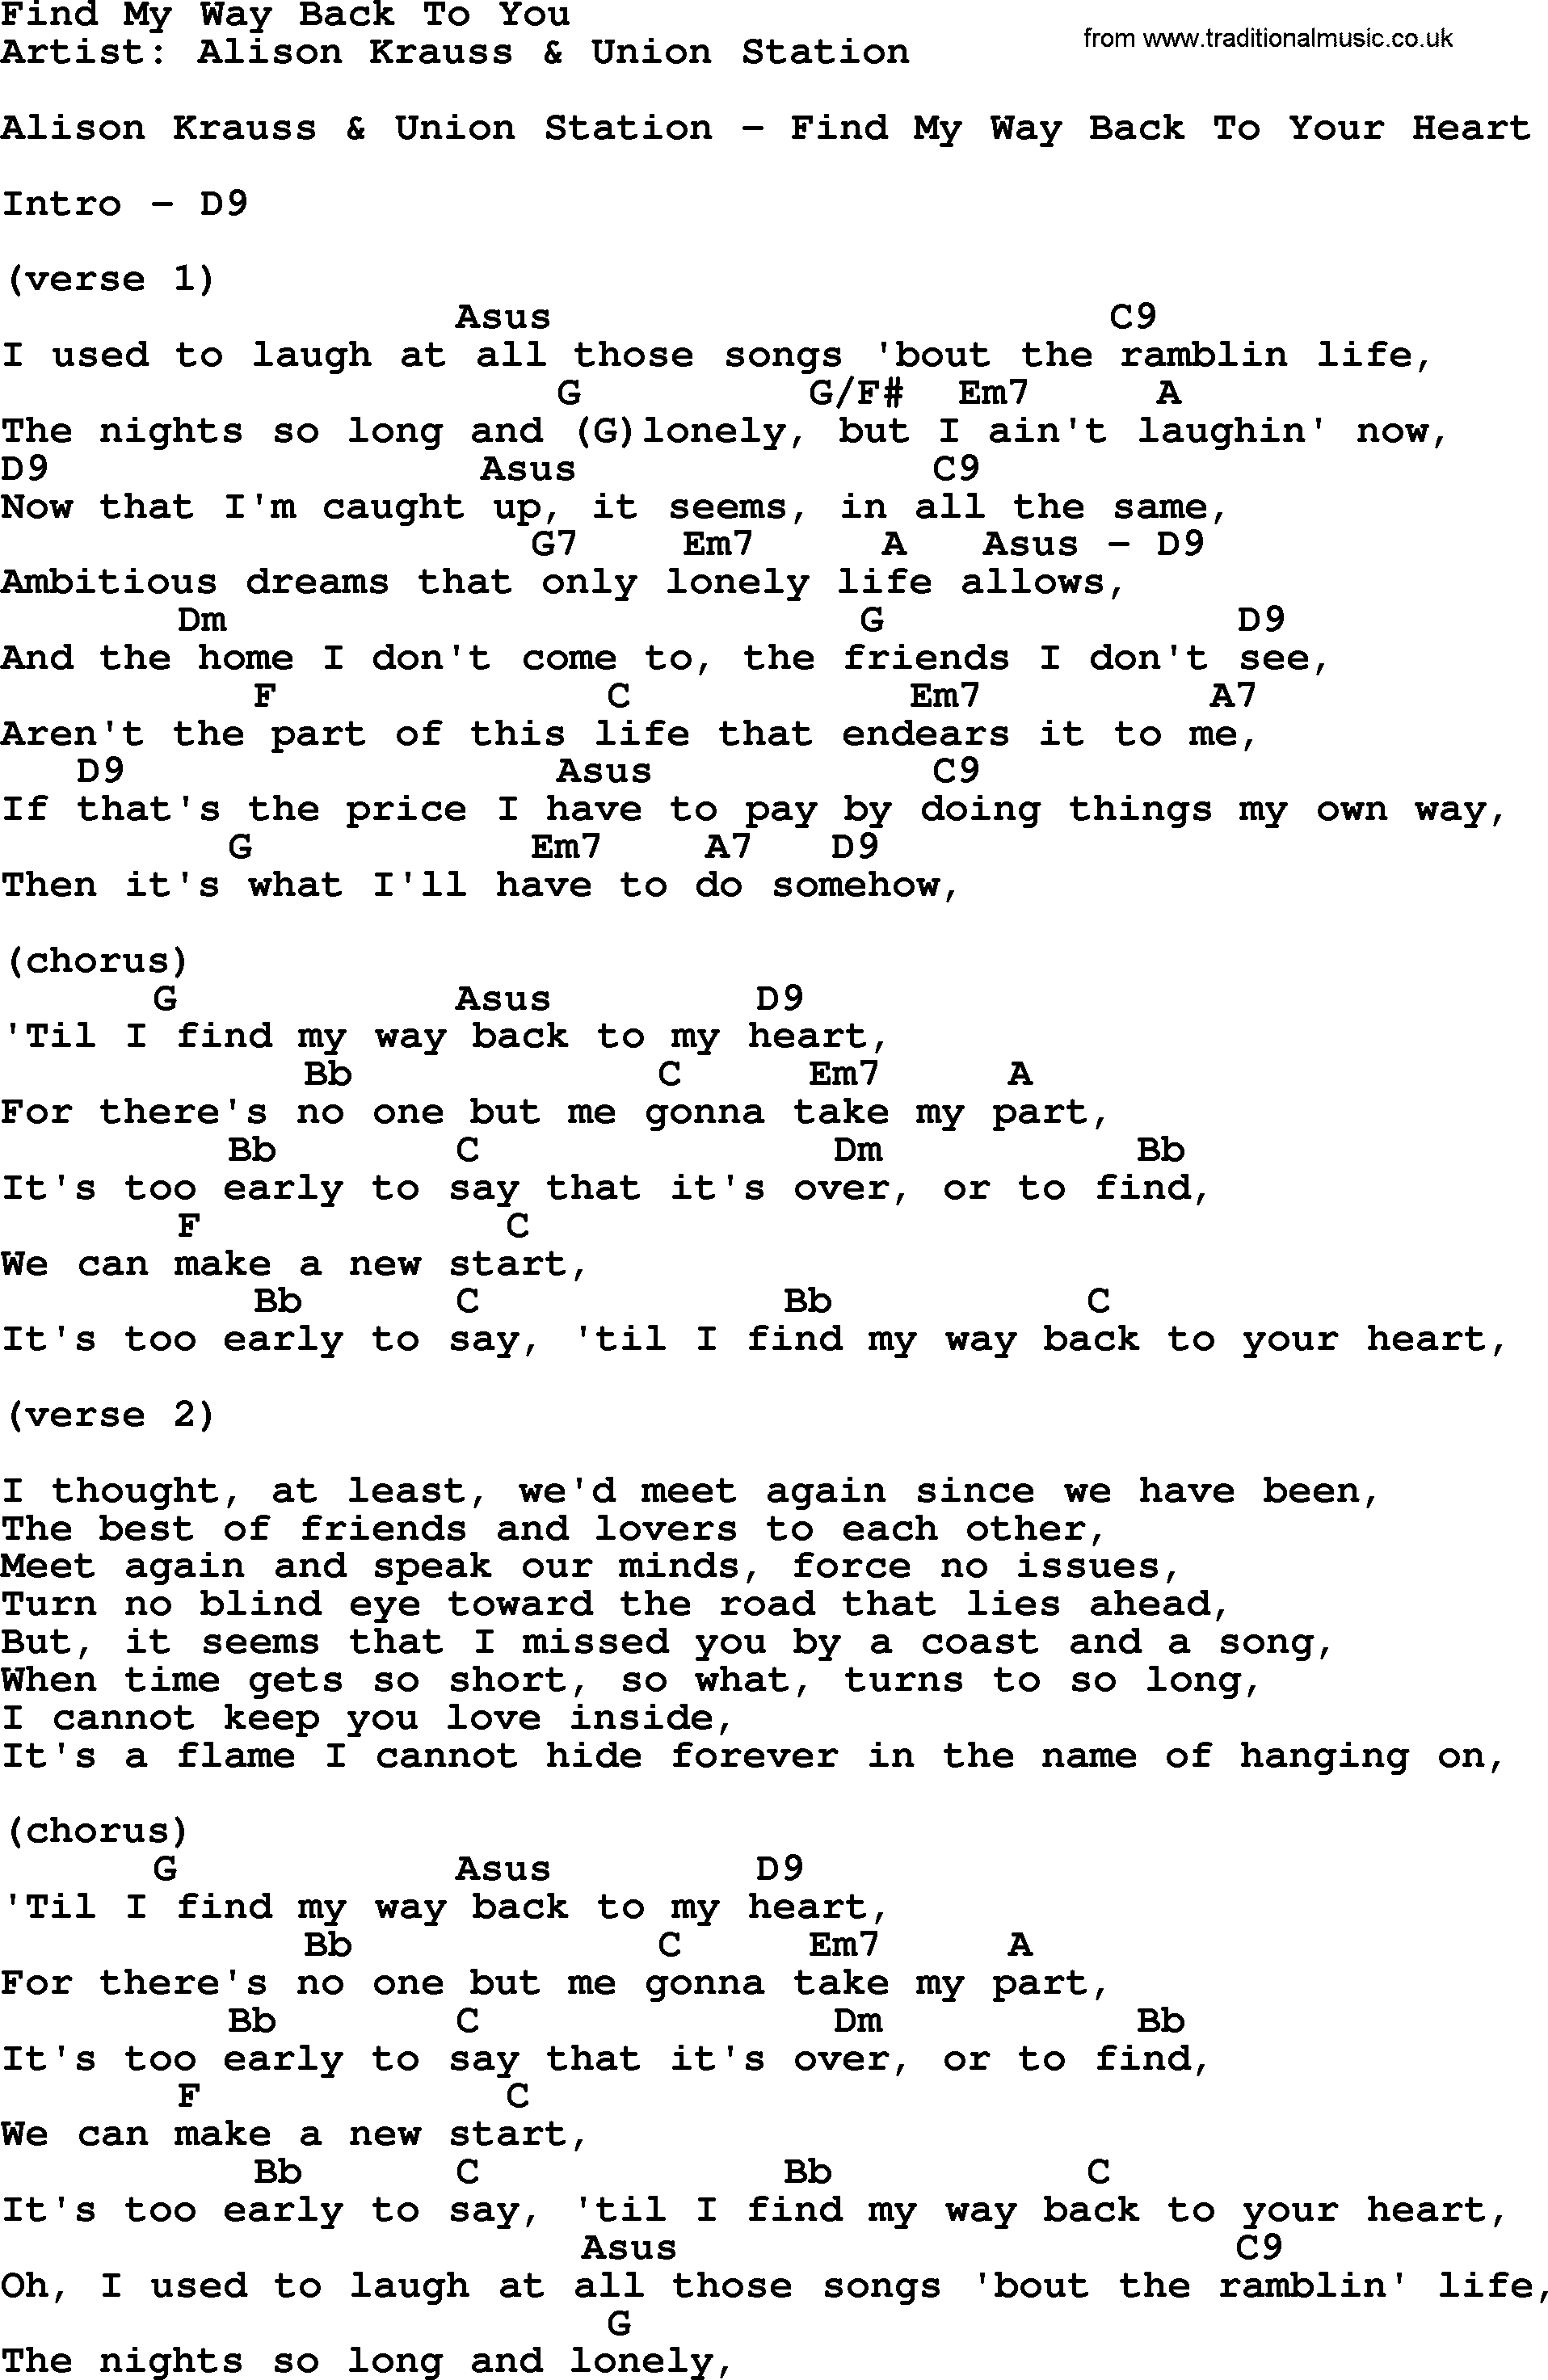 Bluegrass song: Find My Way Back To You, lyrics and chords